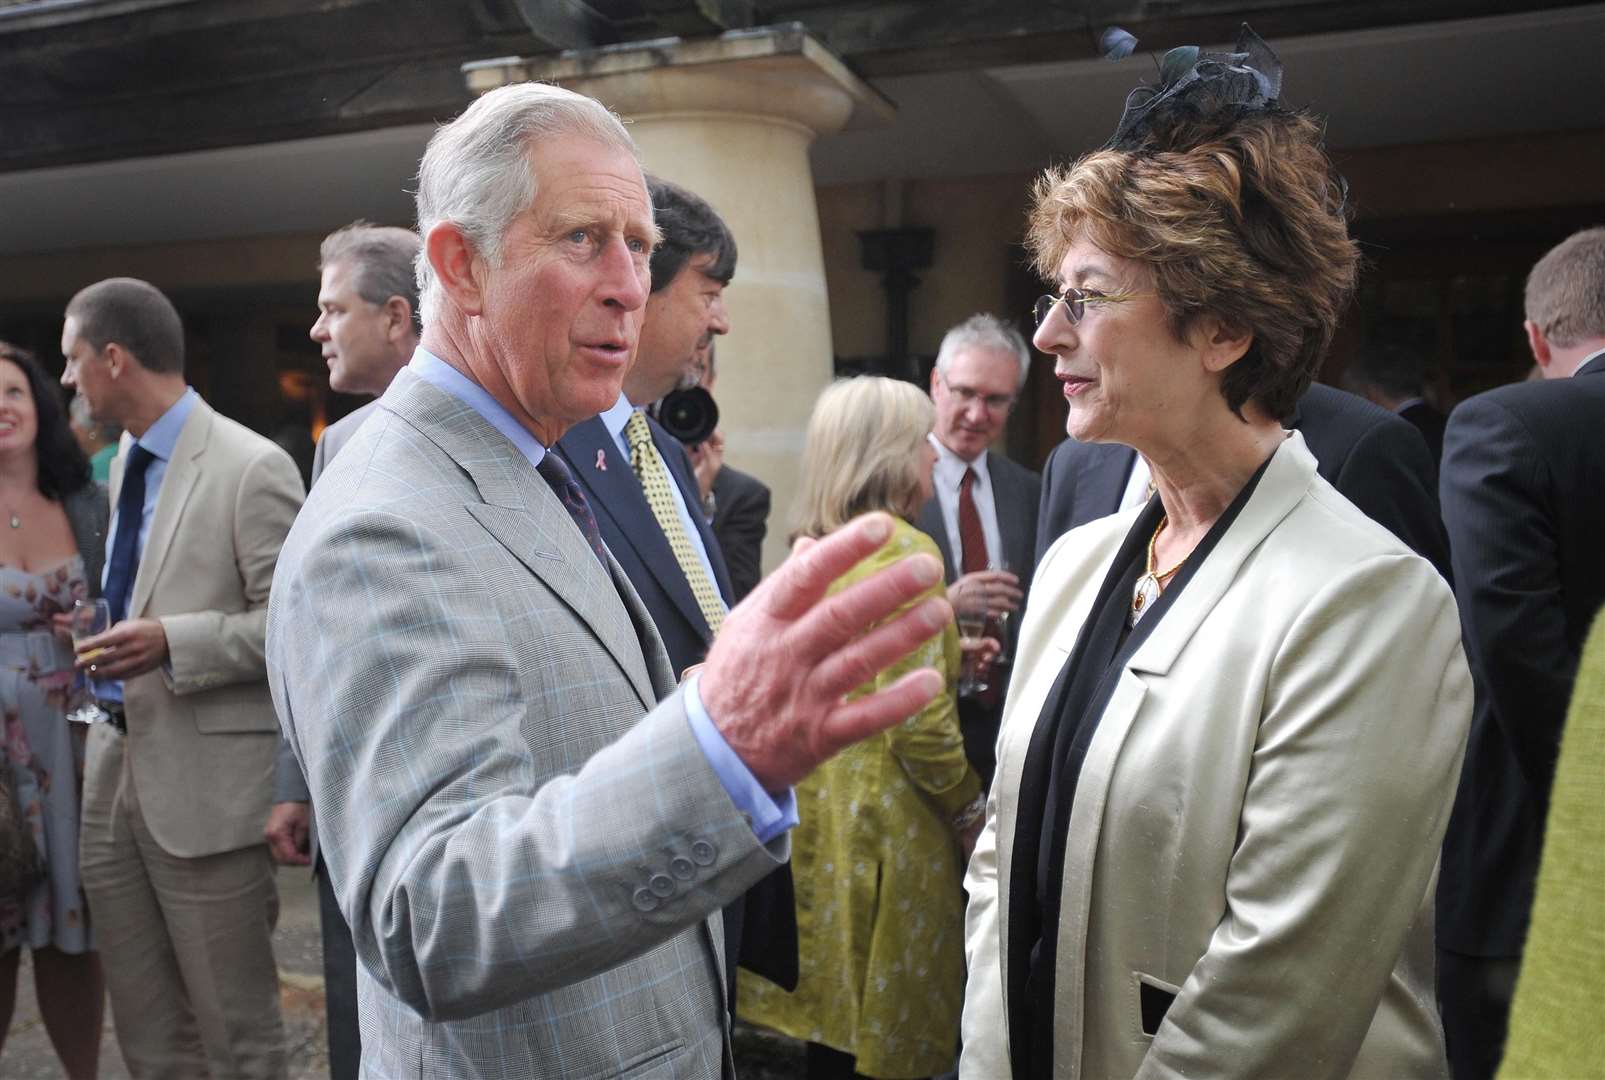 Dame Maureen has met Charles in the past, including for a charity event at Highgrove in 2011 (Tim Ireland/PA)